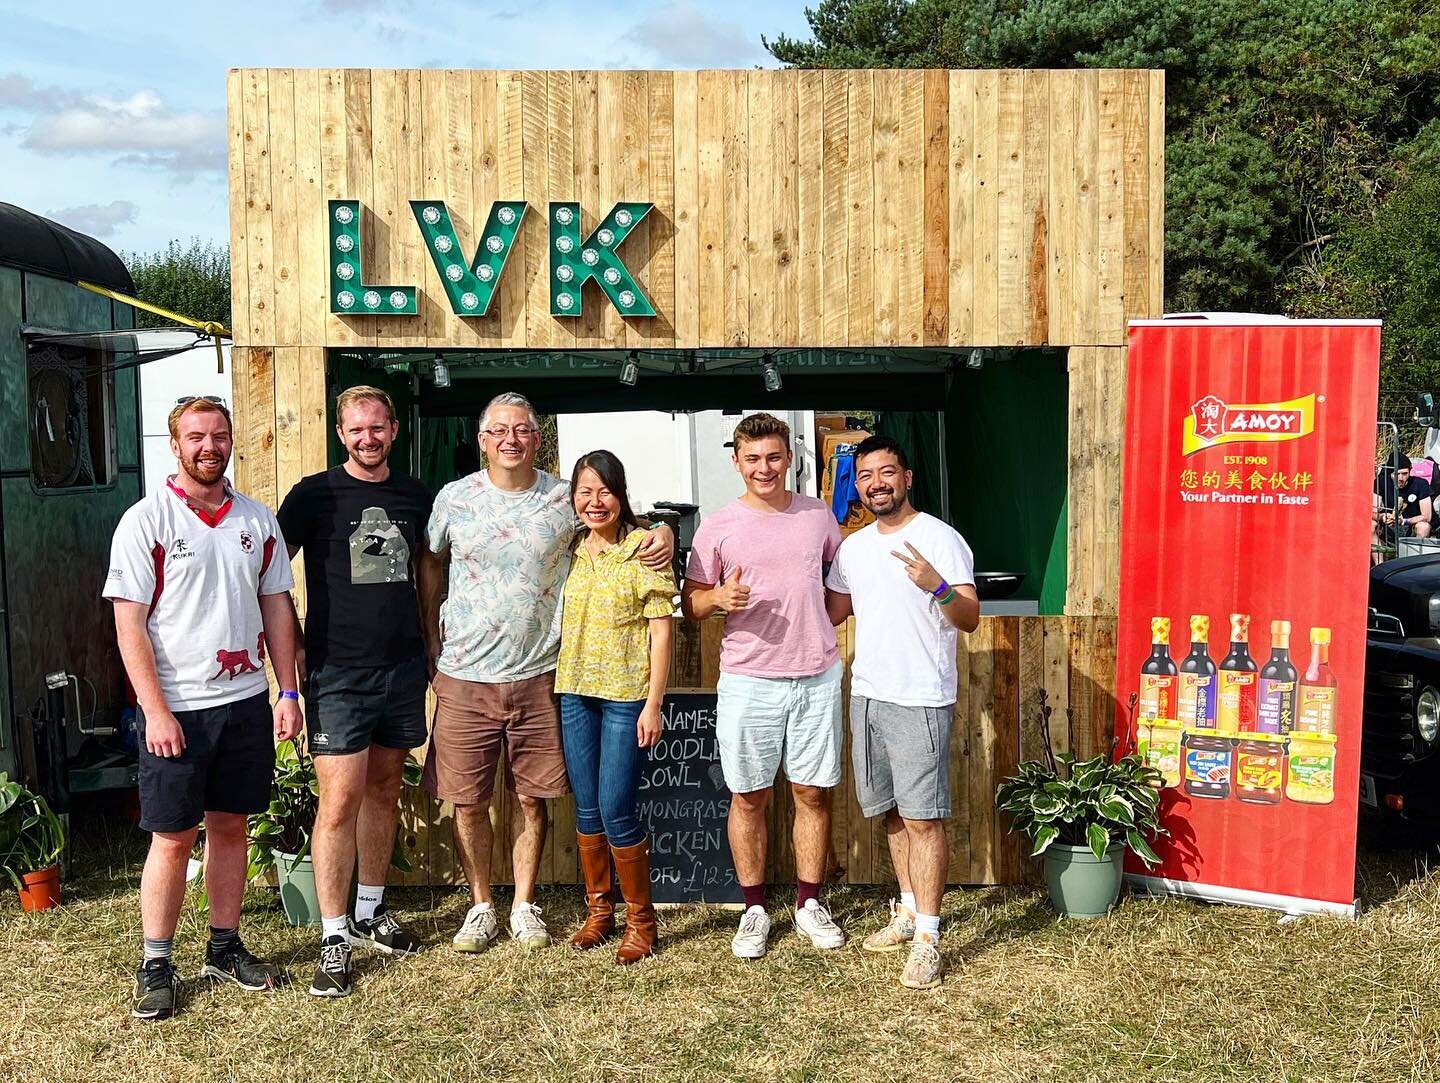 We want to say a huge thank you to @thebigfeastival for having us, and to everyone who came to support our very first service here! We loved sharing our noodle bowls with you and cannot wait to be back next year! Last but not least, our amazing team.